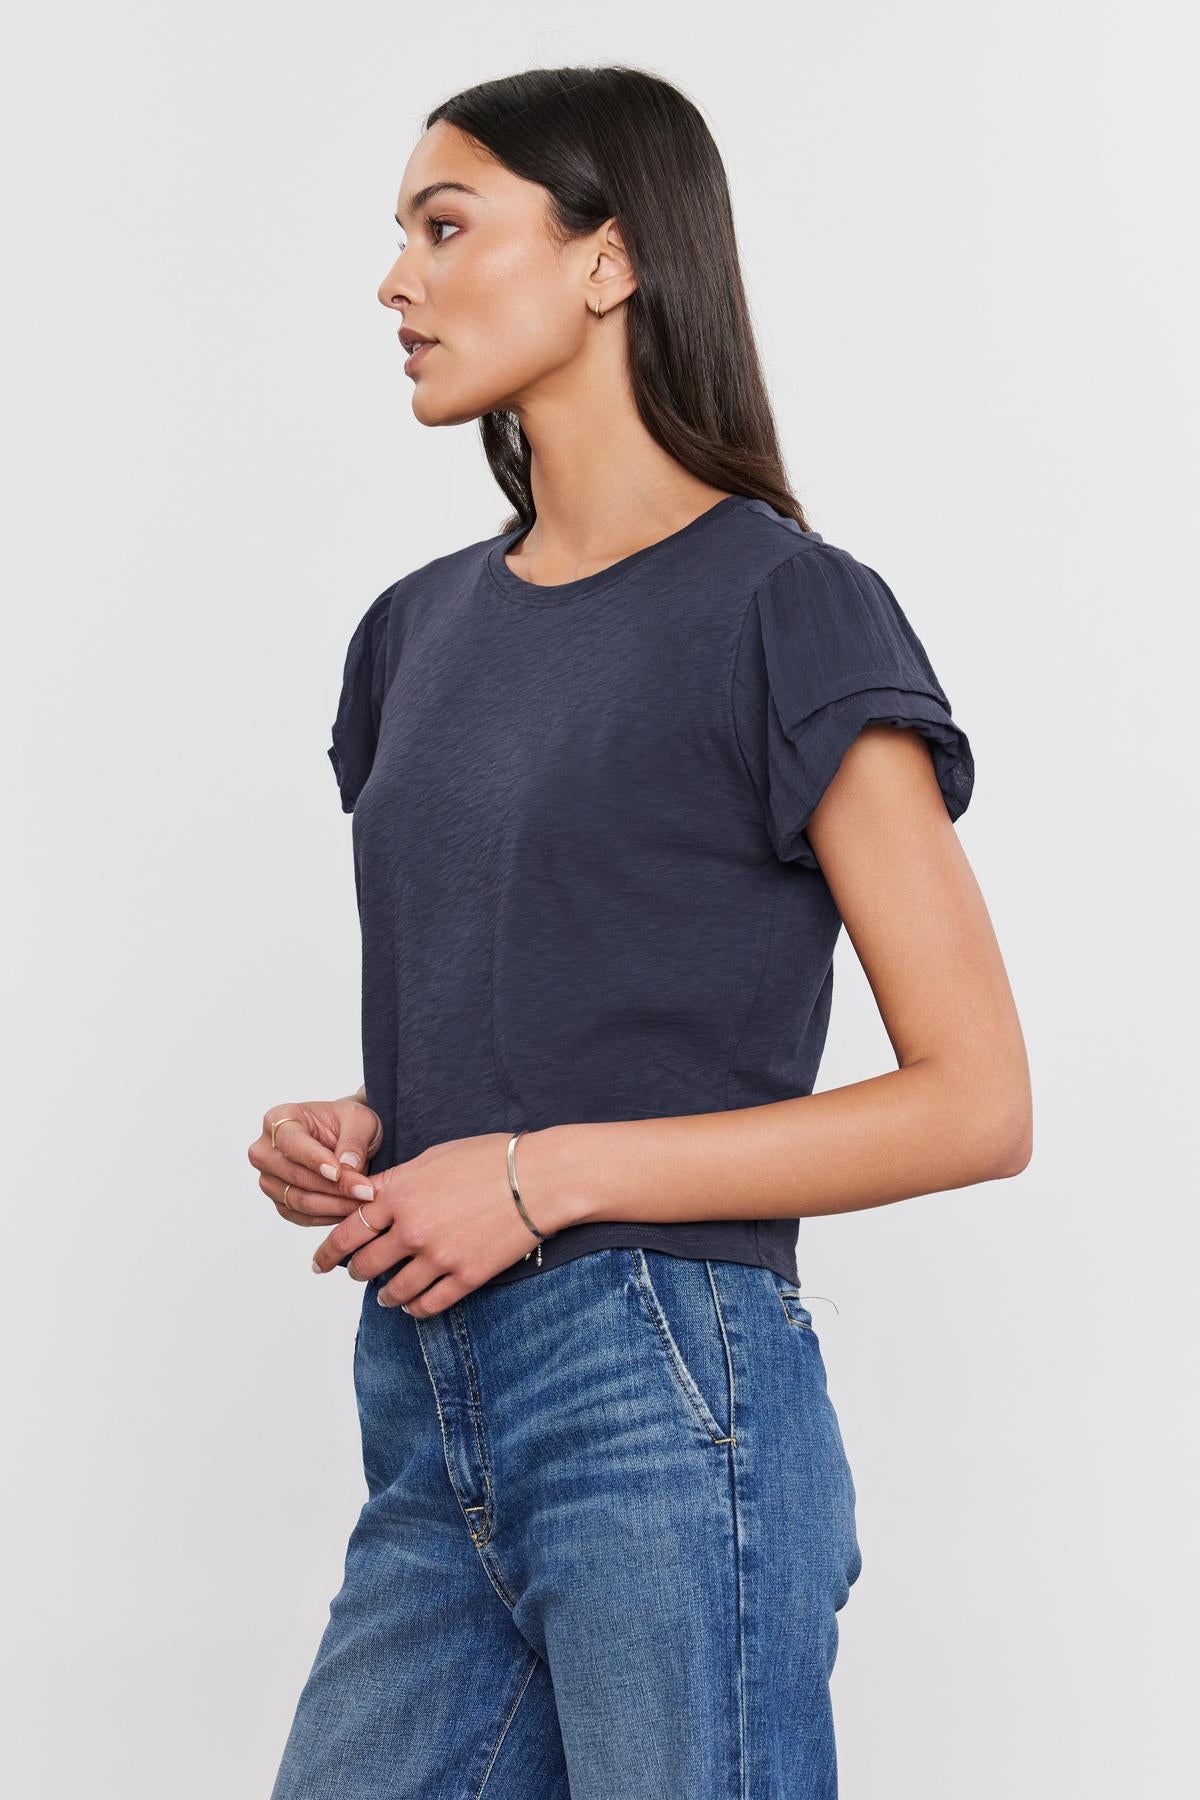   Profile view of a woman in a dark blue Della Tee by Velvet by Graham & Spencer with pleated sleeve detail and blue jeans, standing against a white background. 